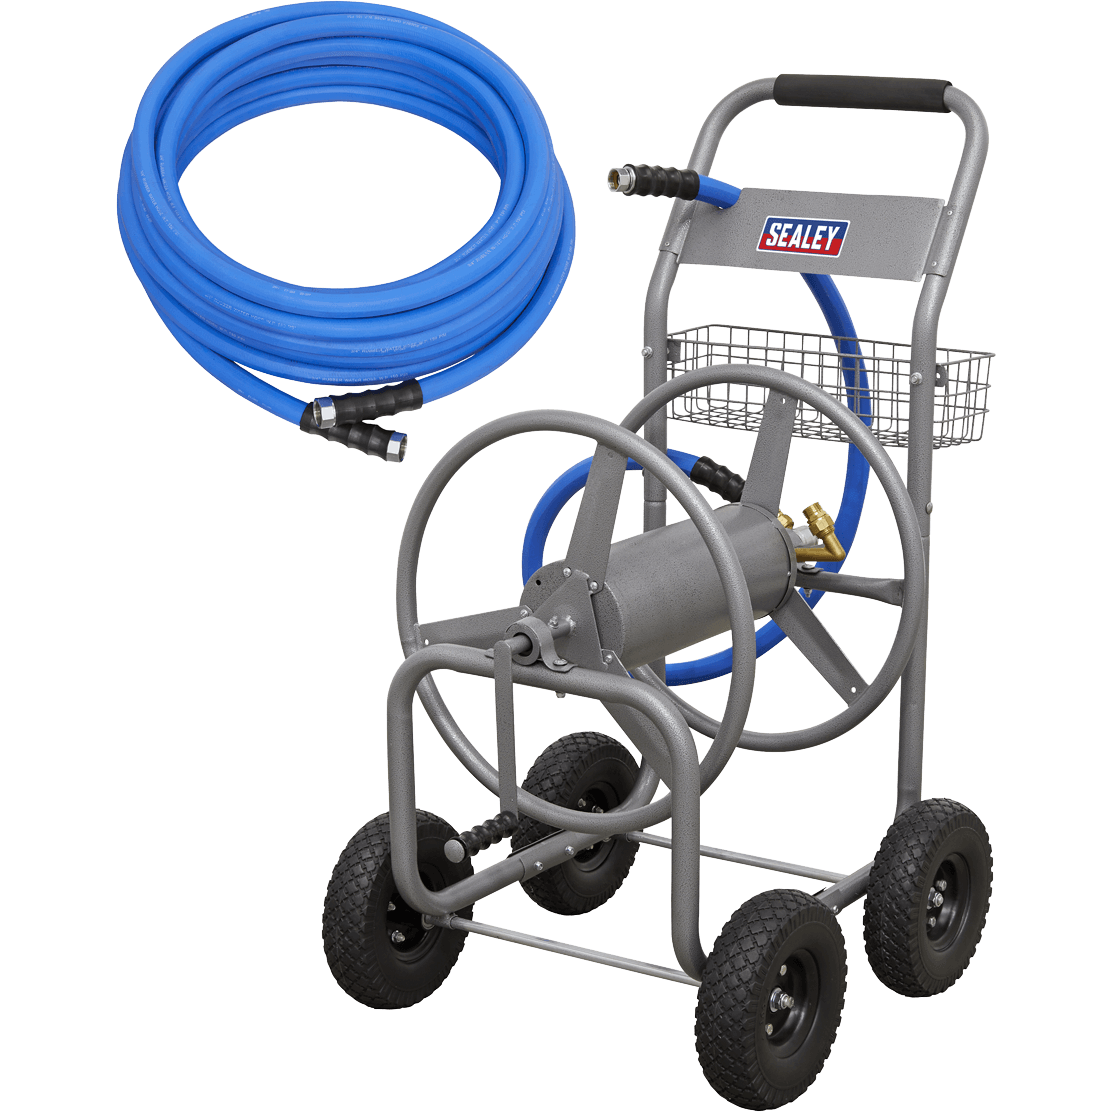 Sealey Hot and Cold Water Rubber Heavy Duty Hose Reel Cart 3/4" / 19mm 15m Blue